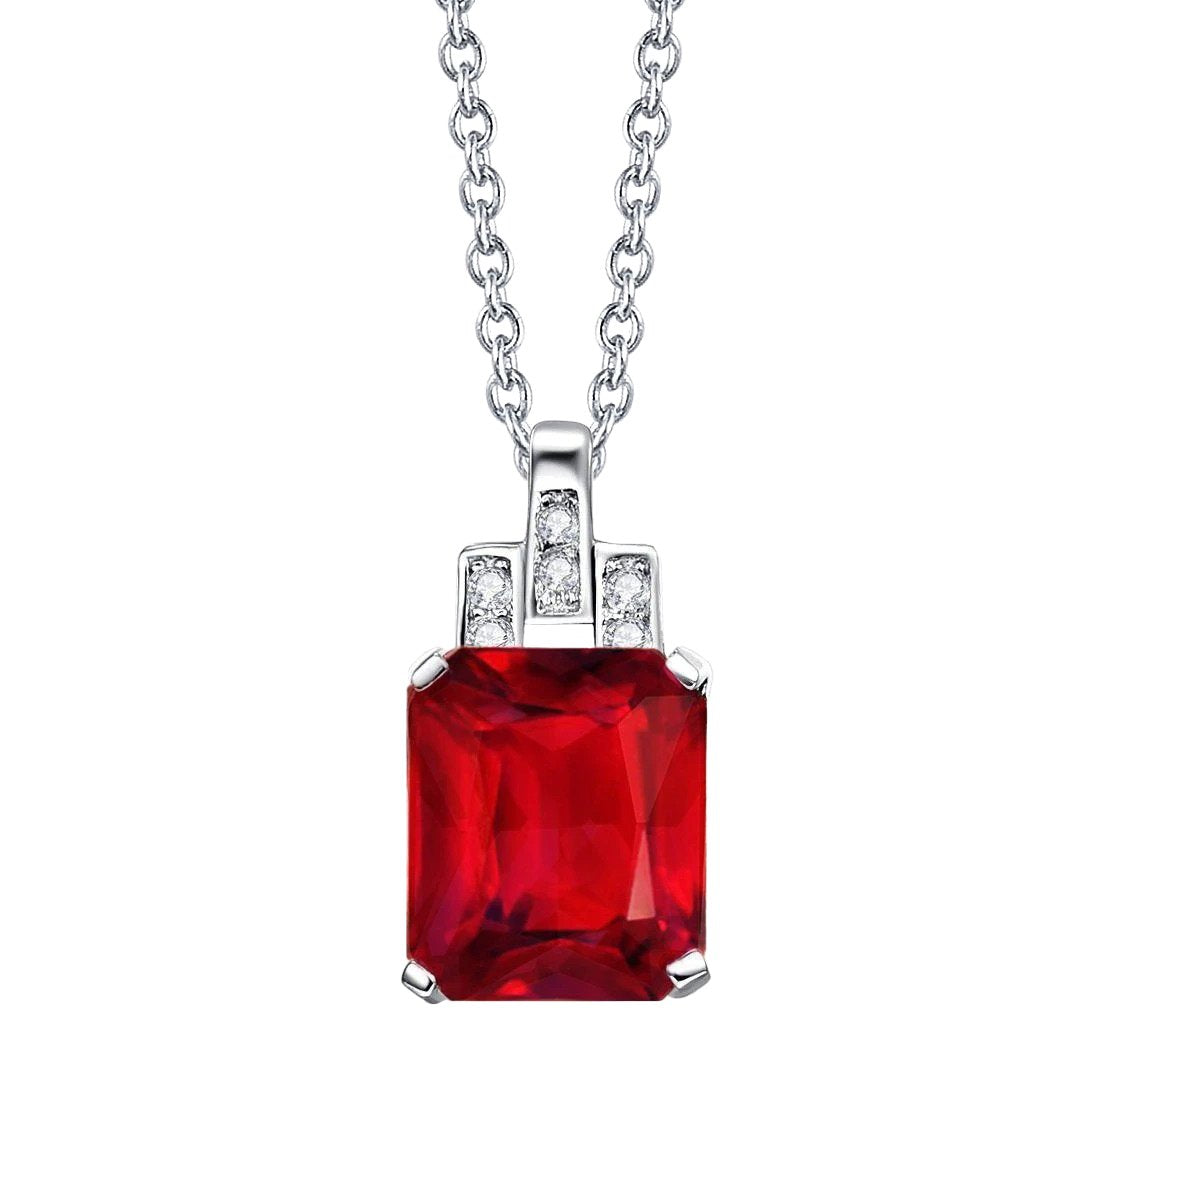 Gold White Pendant Necklace With Chain 9.25 Ct. Ruby And Diamonds